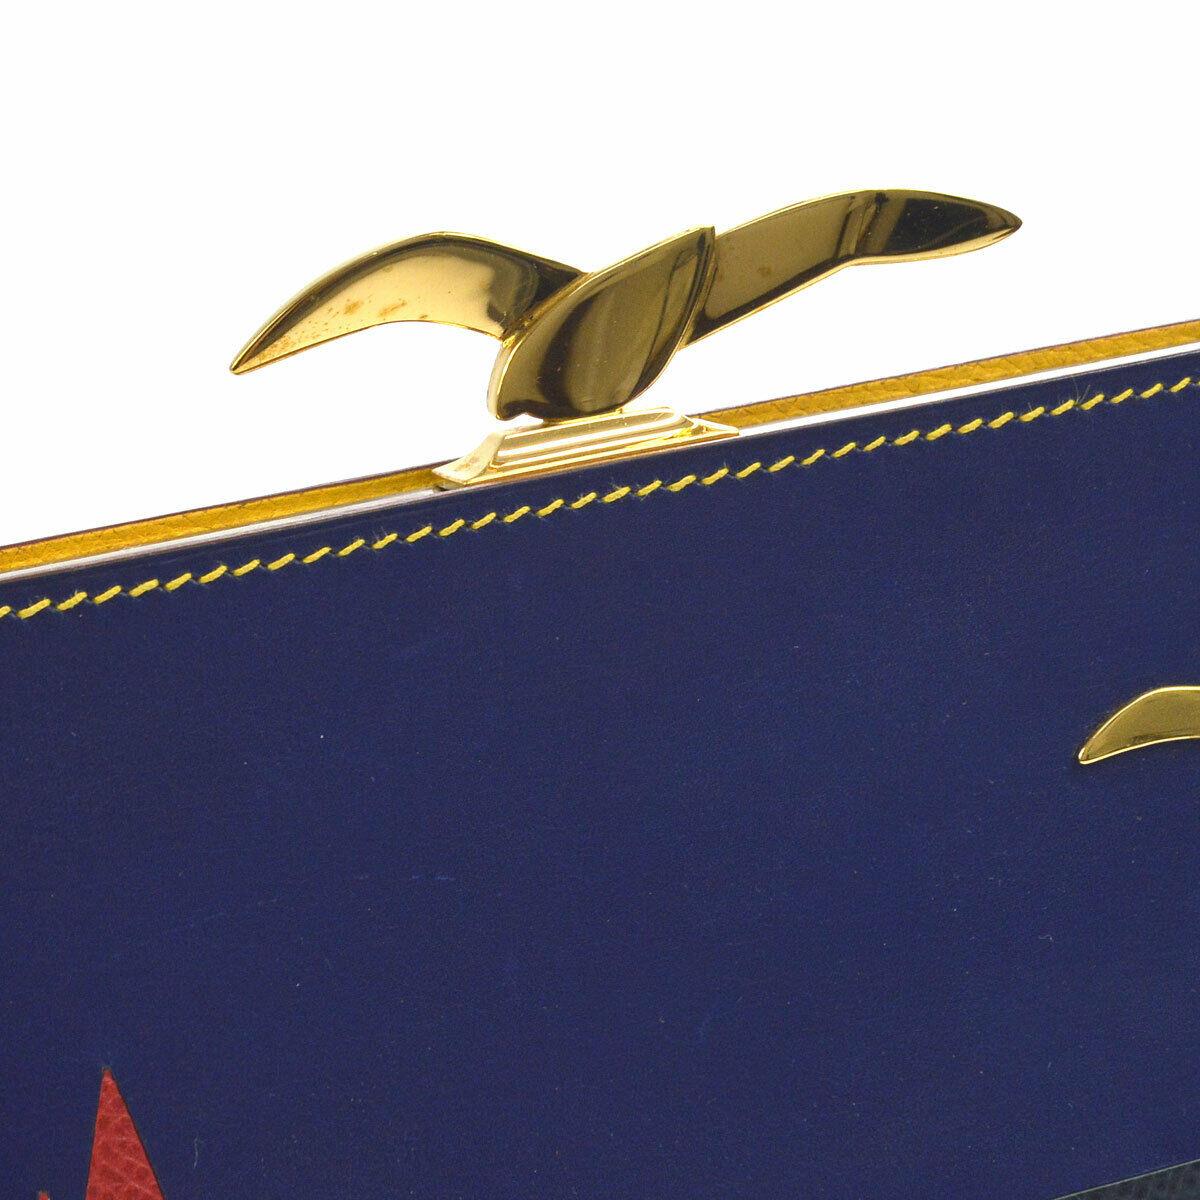 Hermes Vintage Yellow Blue Black Leather Boat Bird Gold Sac Malice Clutch Shoulder in Box

Leather
Gold tone hardware
Kisslock closure
Leather lining
Date code present
Made in France 
Shoulder strap drop 17